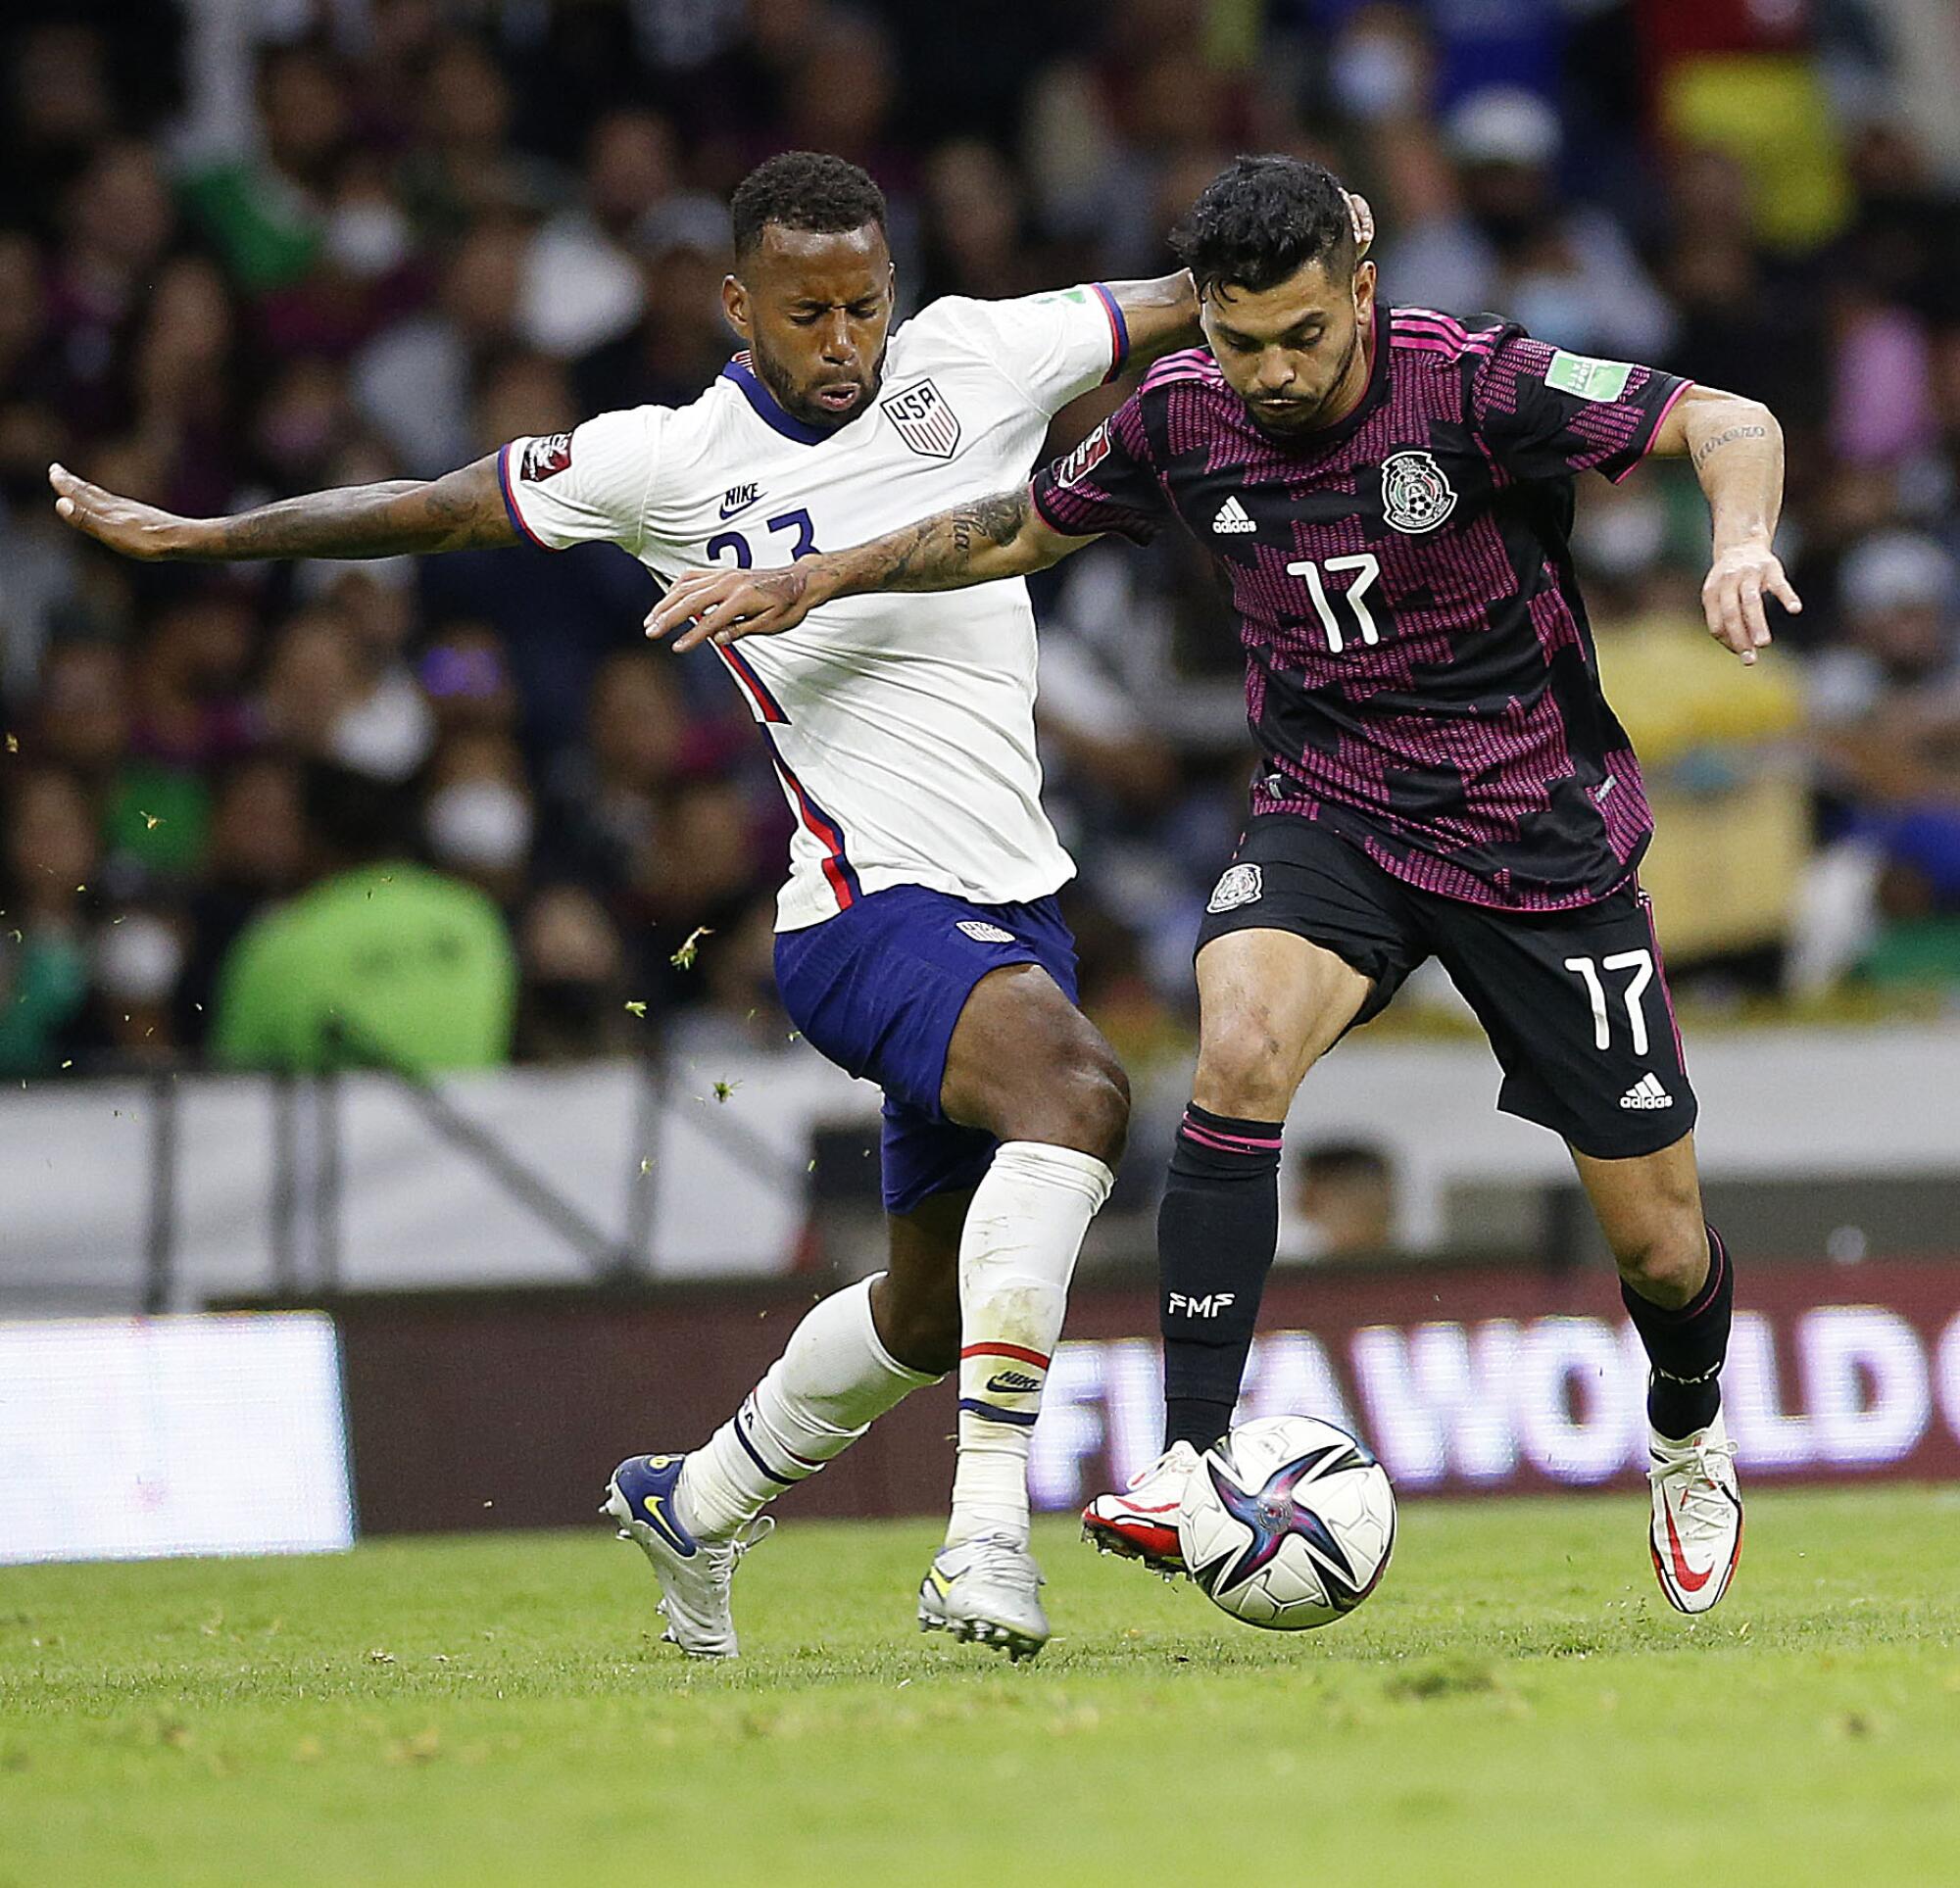 U.S. midfielder Kellyn Acosta and Mexico forward Jesus Corona battle for the ball in the first half.